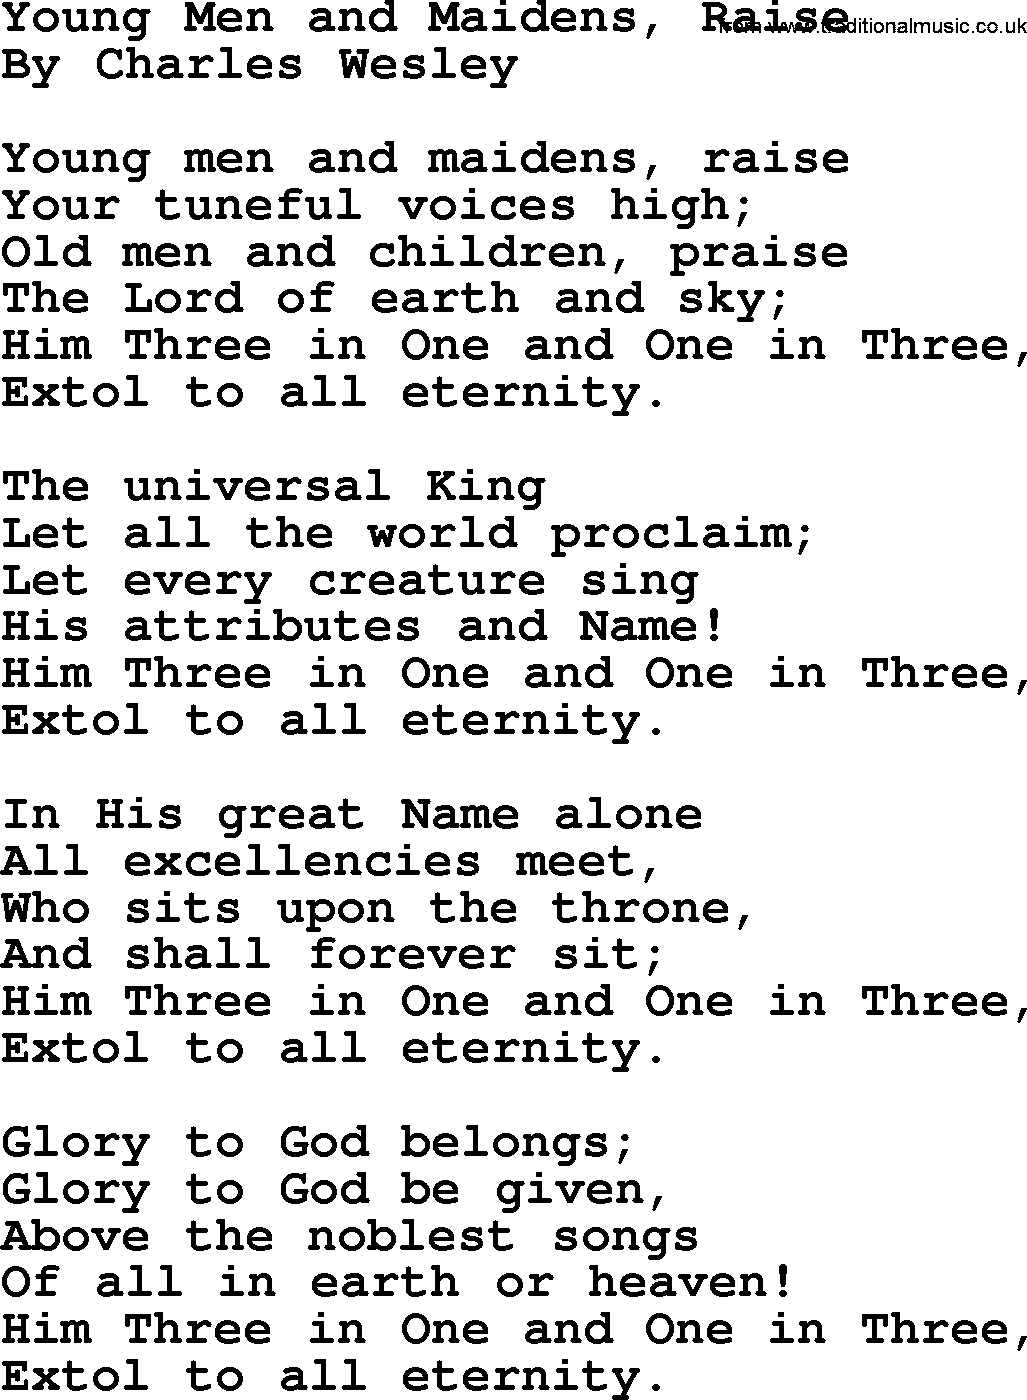 Charles Wesley hymn: Young Men And Maidens, Raise, lyrics